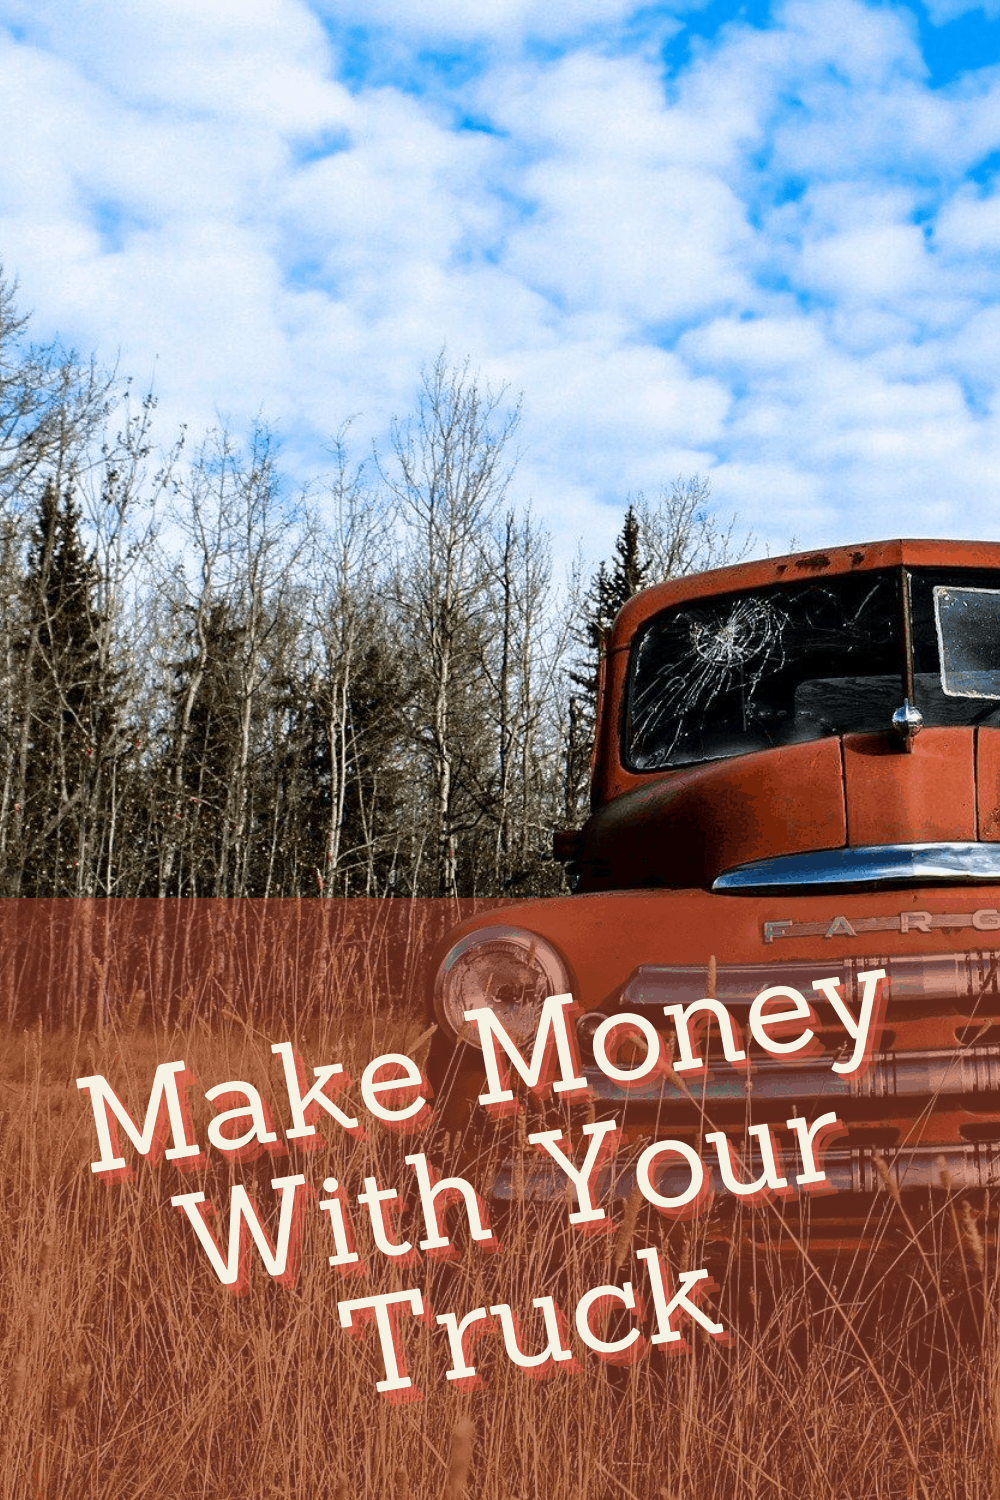 Making money with your pickup truck